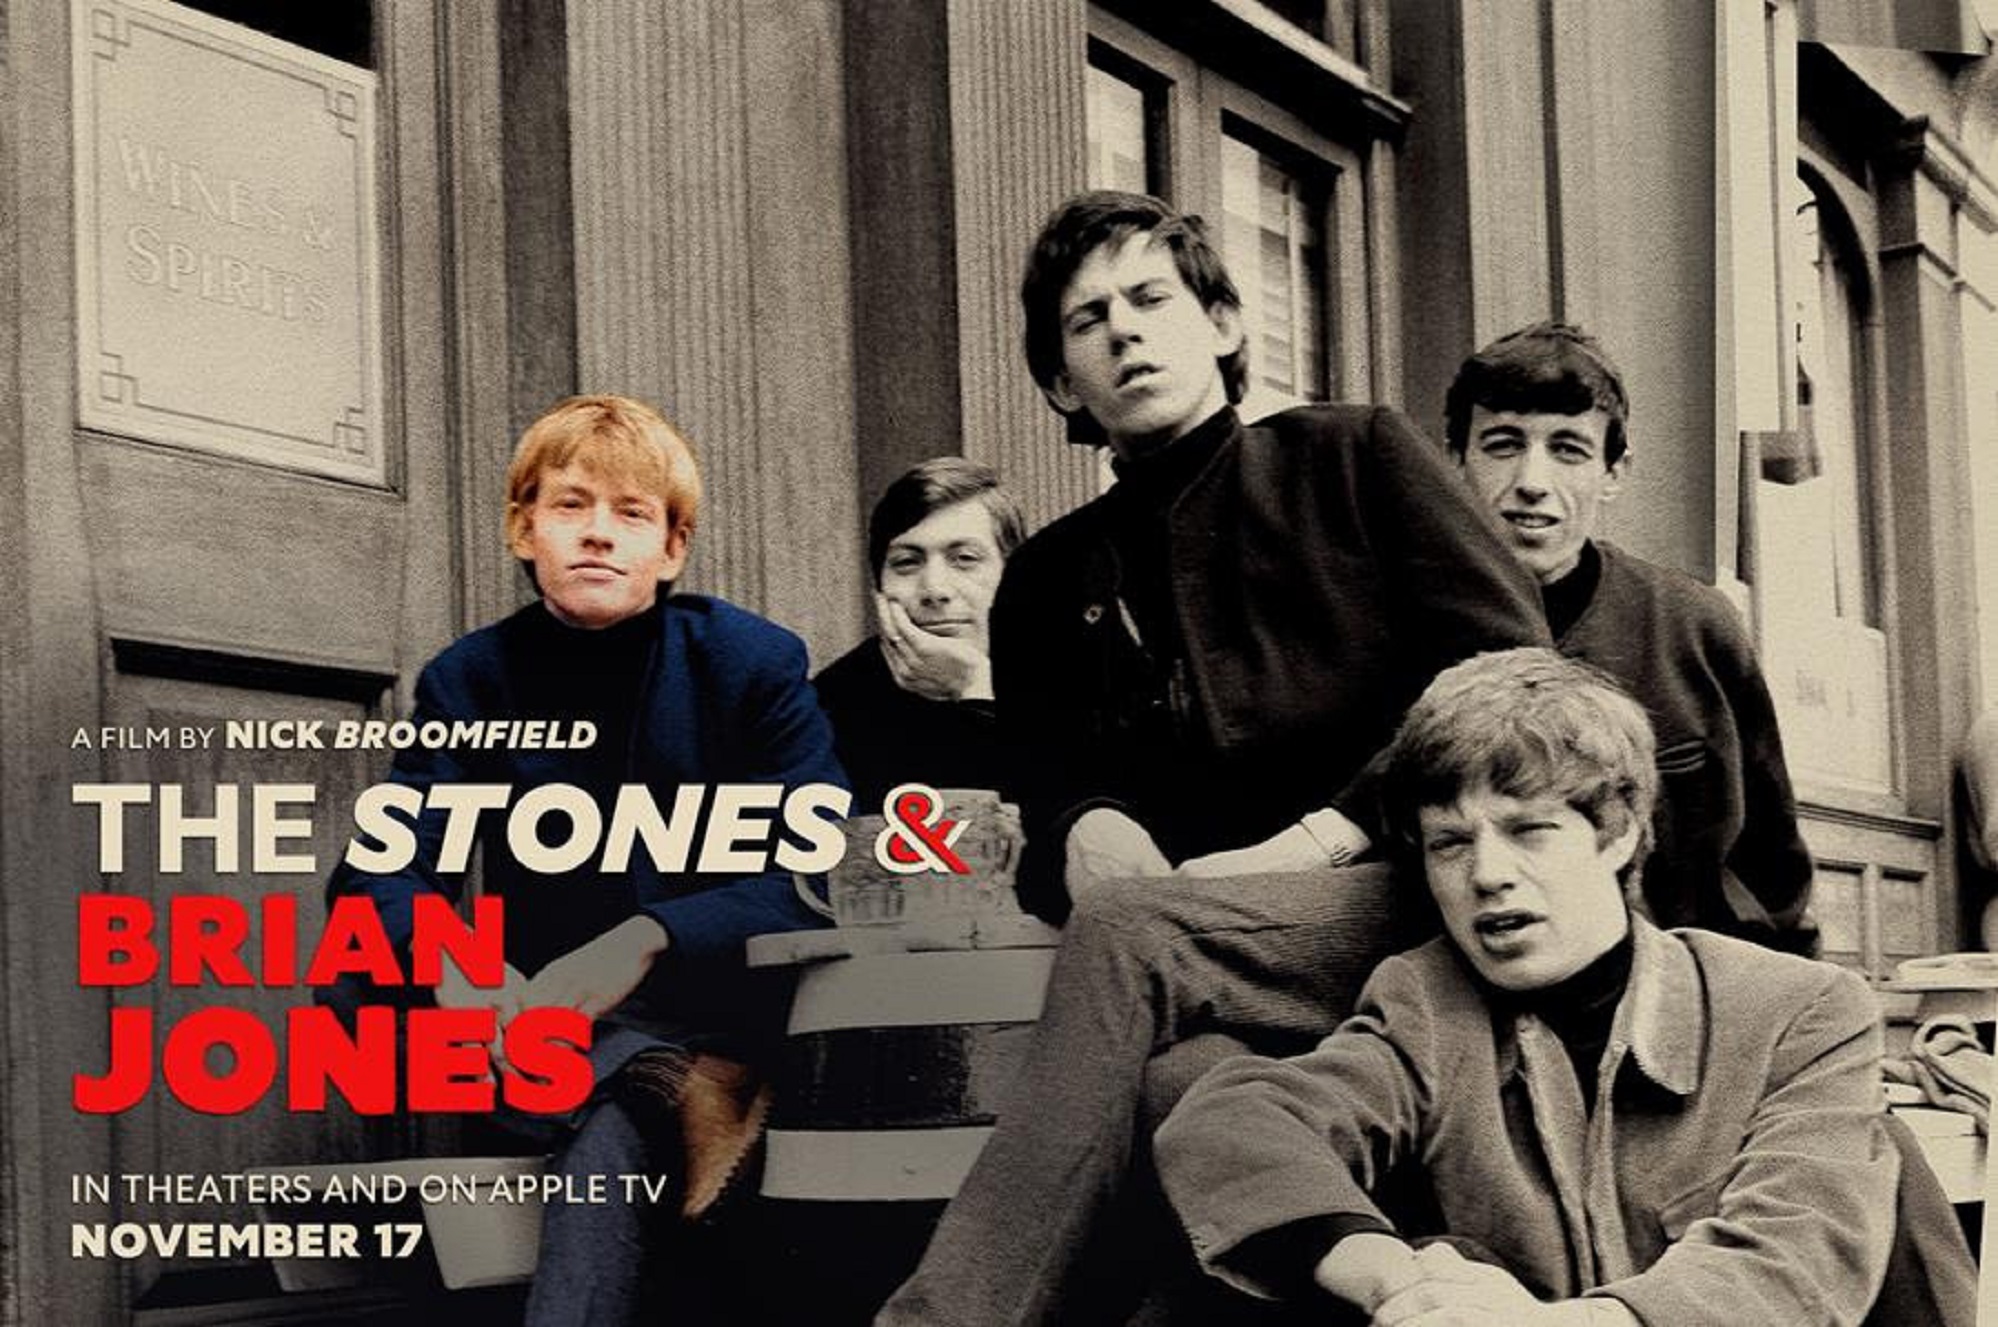 THE STONES AND BRIAN JONES | One-night only theatrical event is tomorrow, Nov. 7